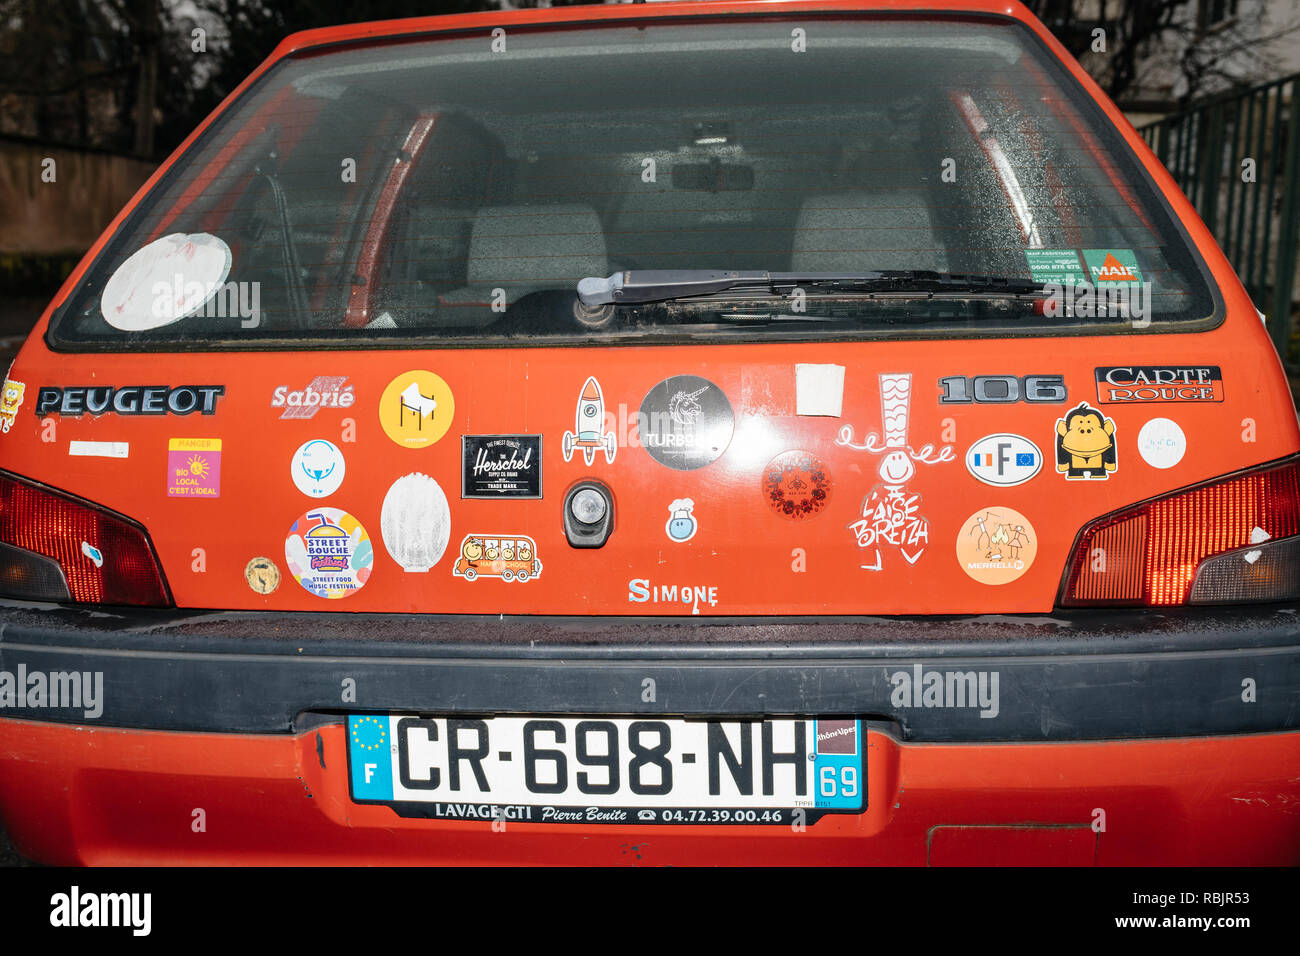 Strasbourg, France - Jan 1, 2019: Rear view of red vintage Peugeot car with multiple stickers from know cartoon to diverse brands  Stock Photo